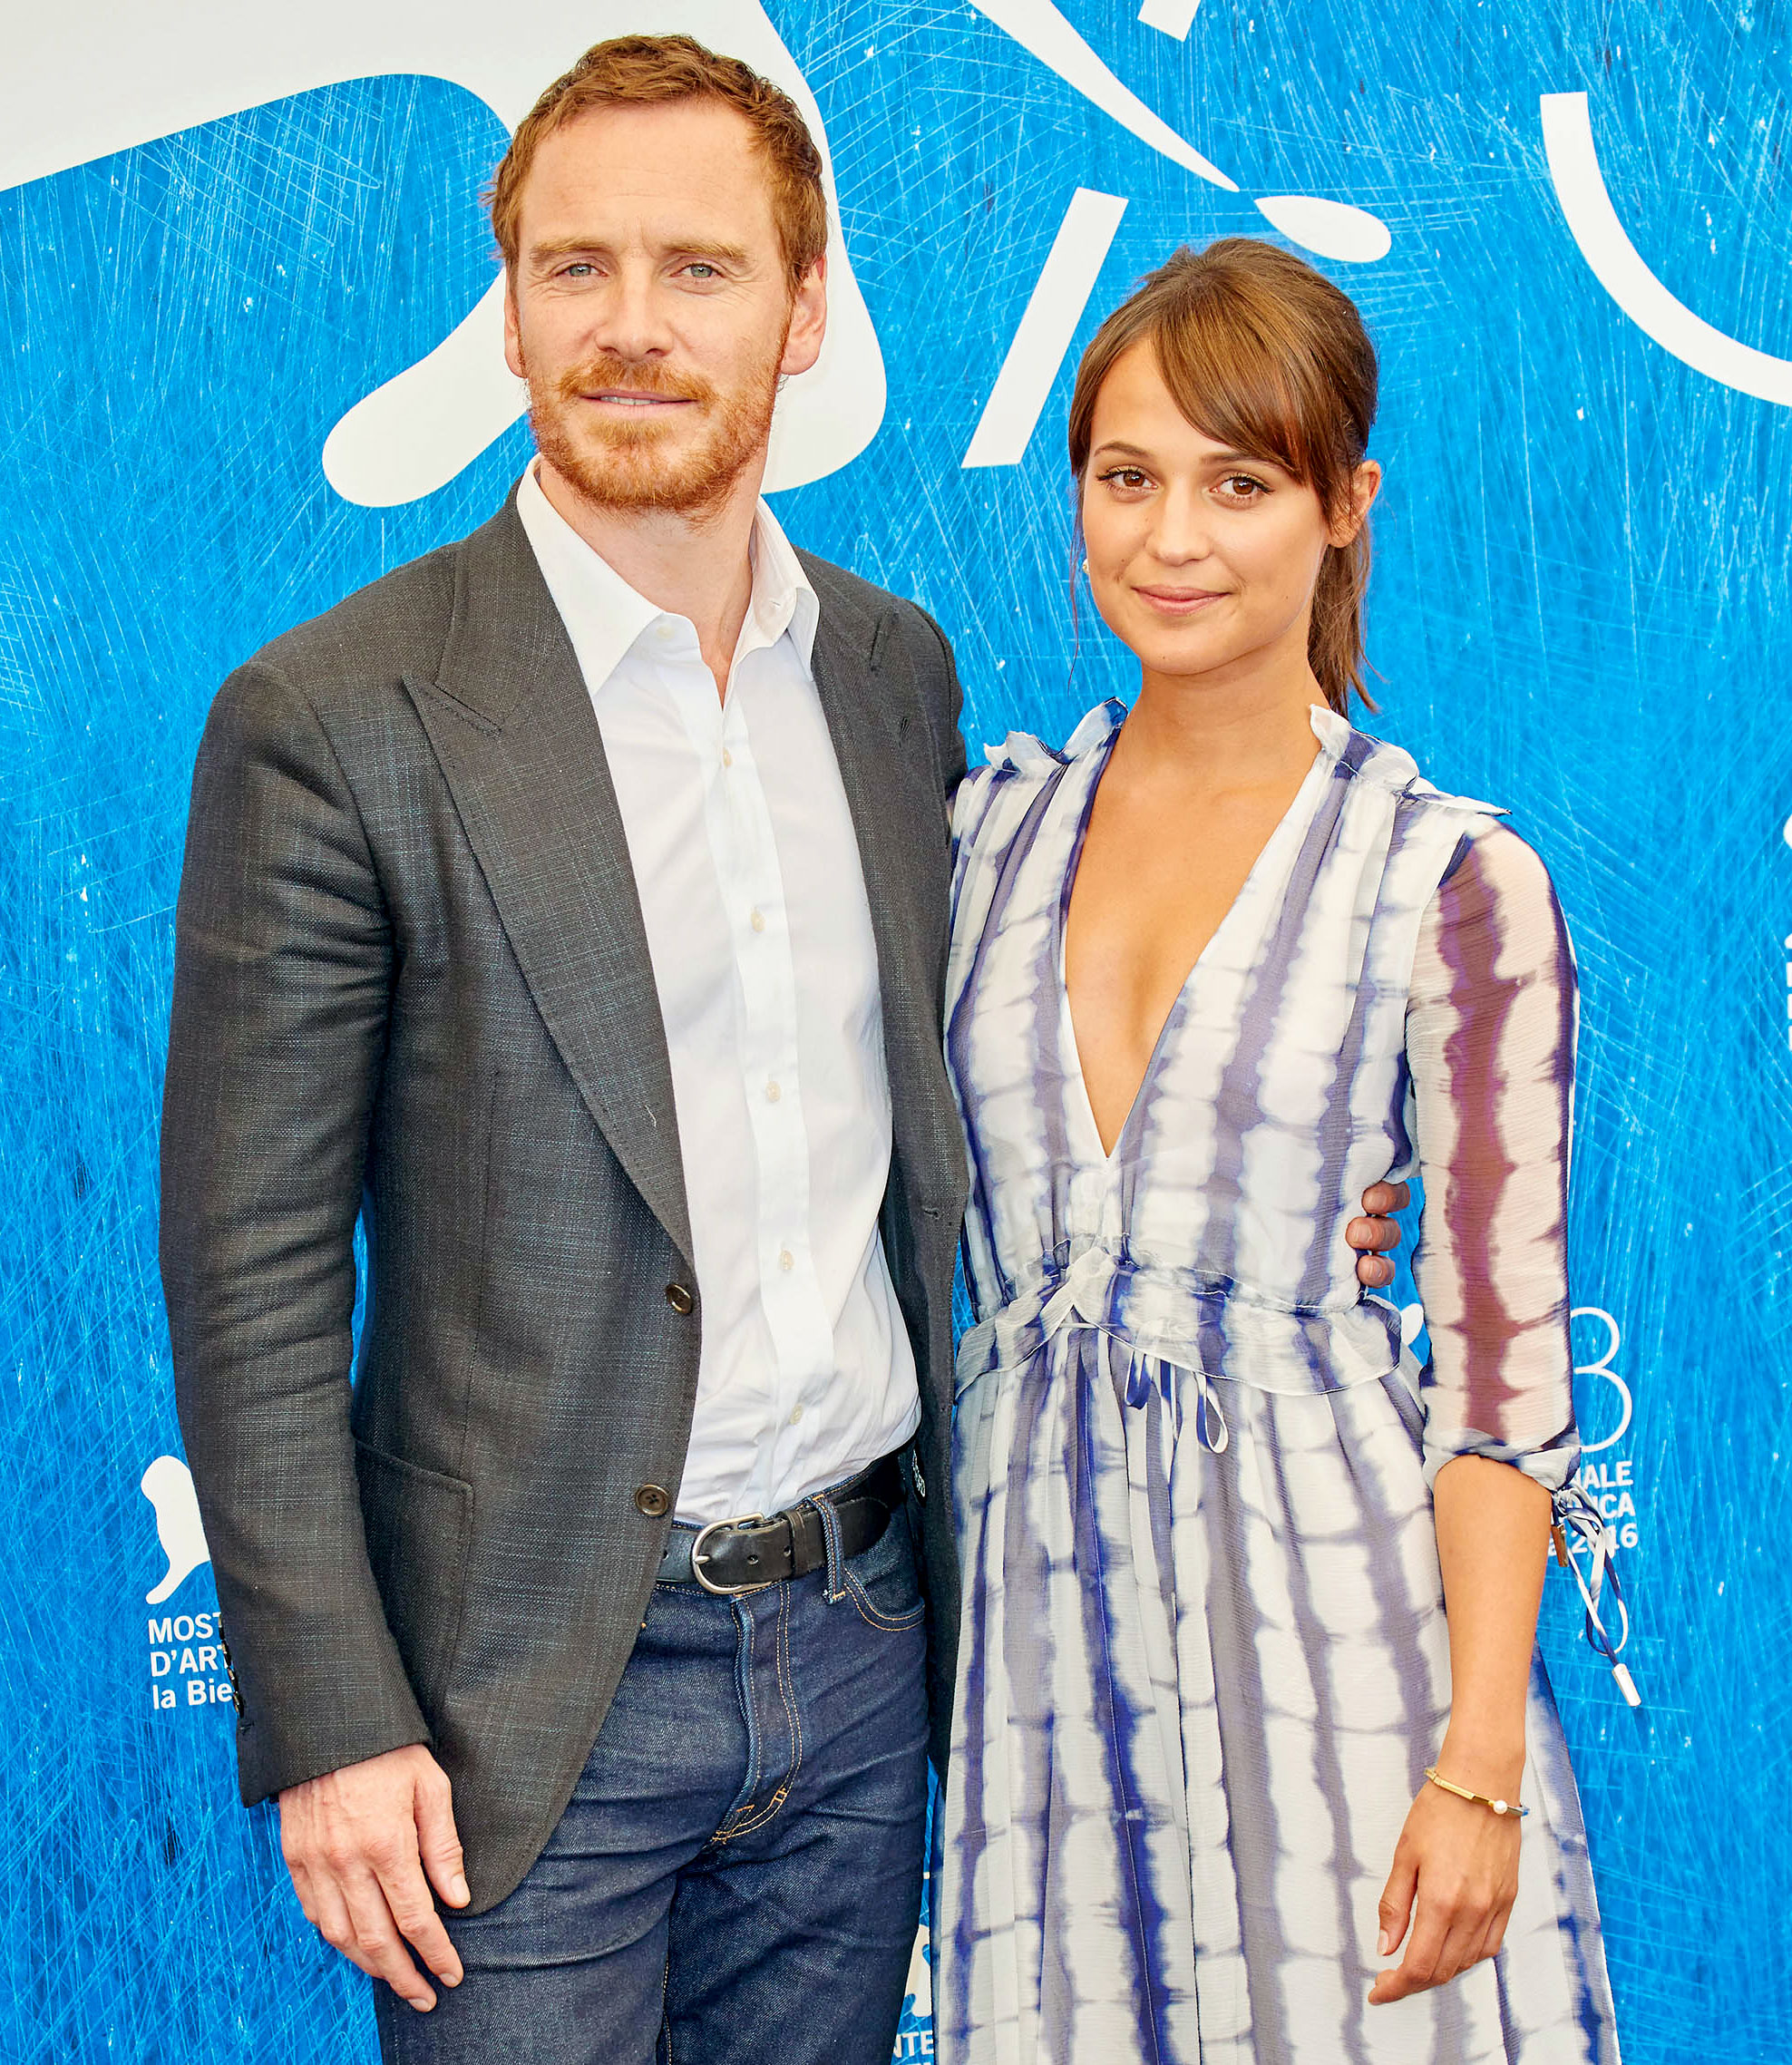 Alicia Vikander, 32, confirms she welcomed first baby after secret